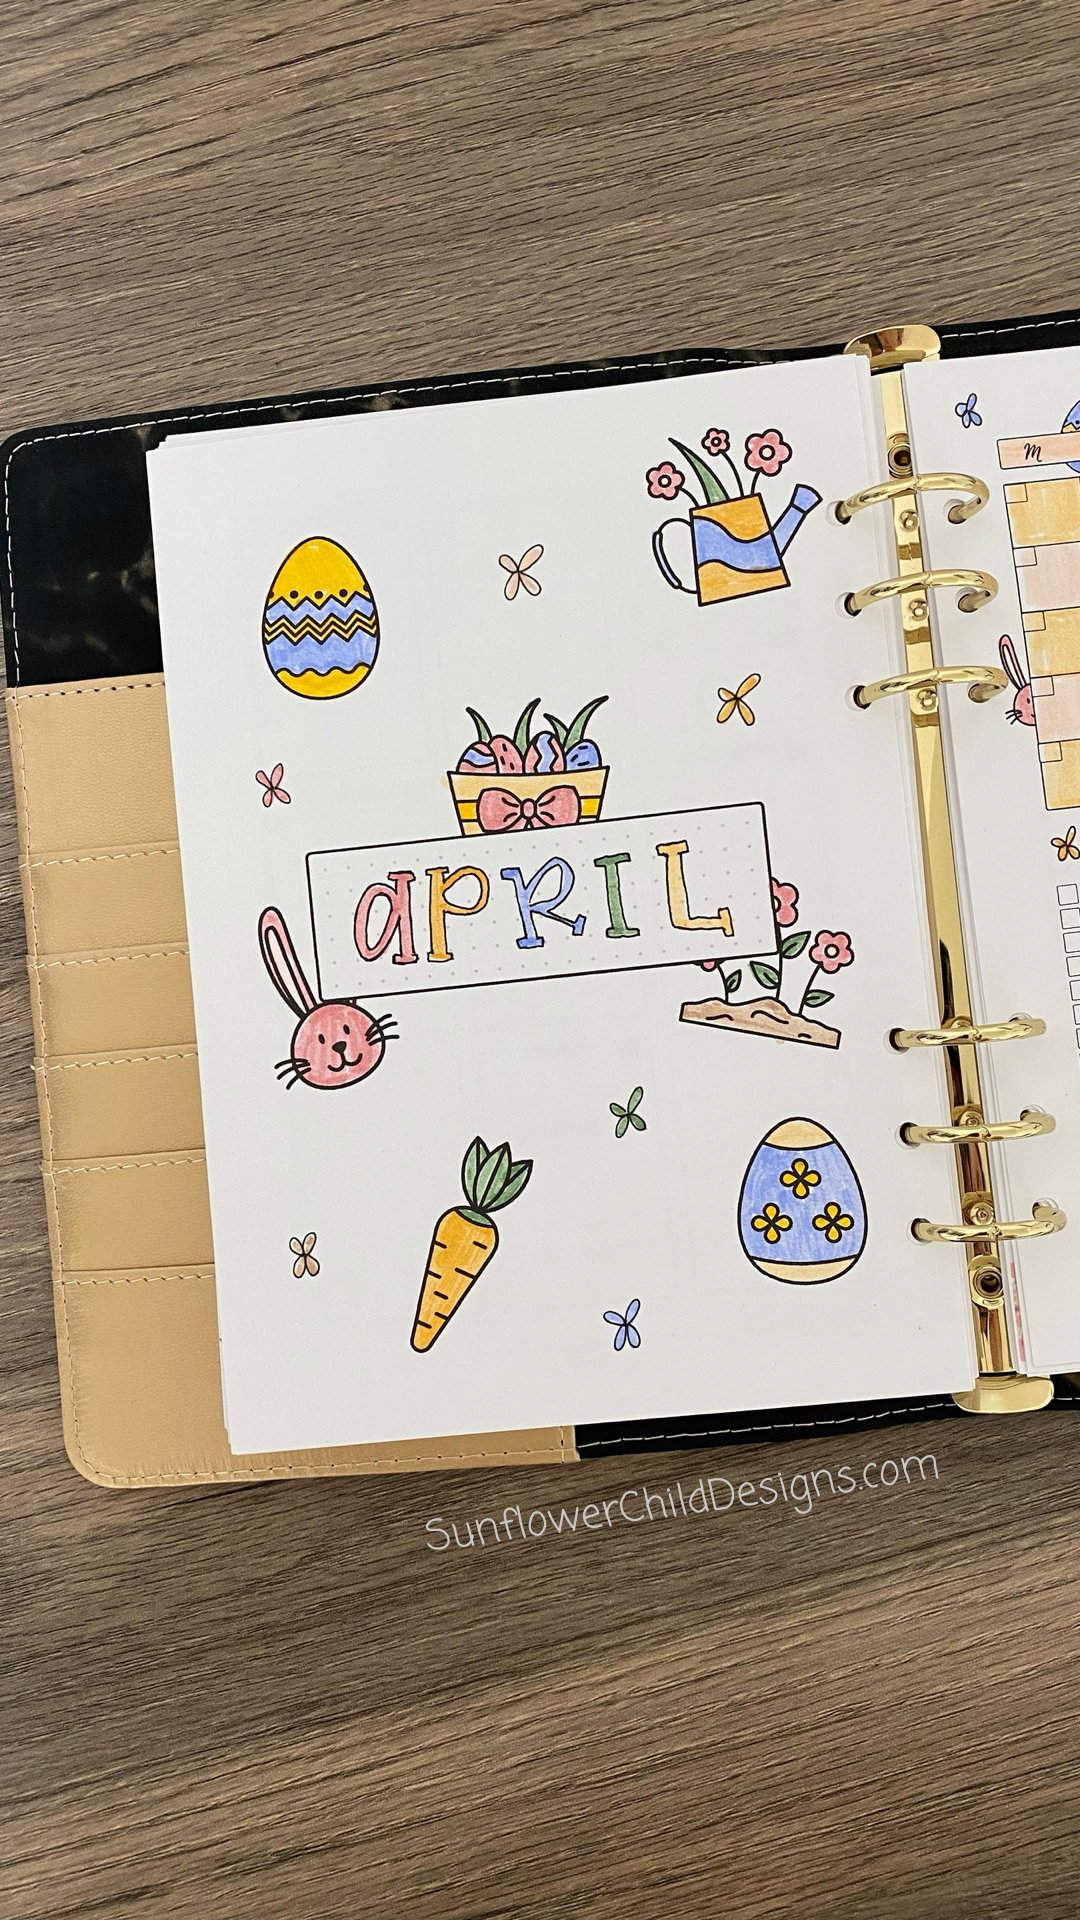 April Bullet Journal Cover Page Happy Easer Themed Bullet Journal Ideas